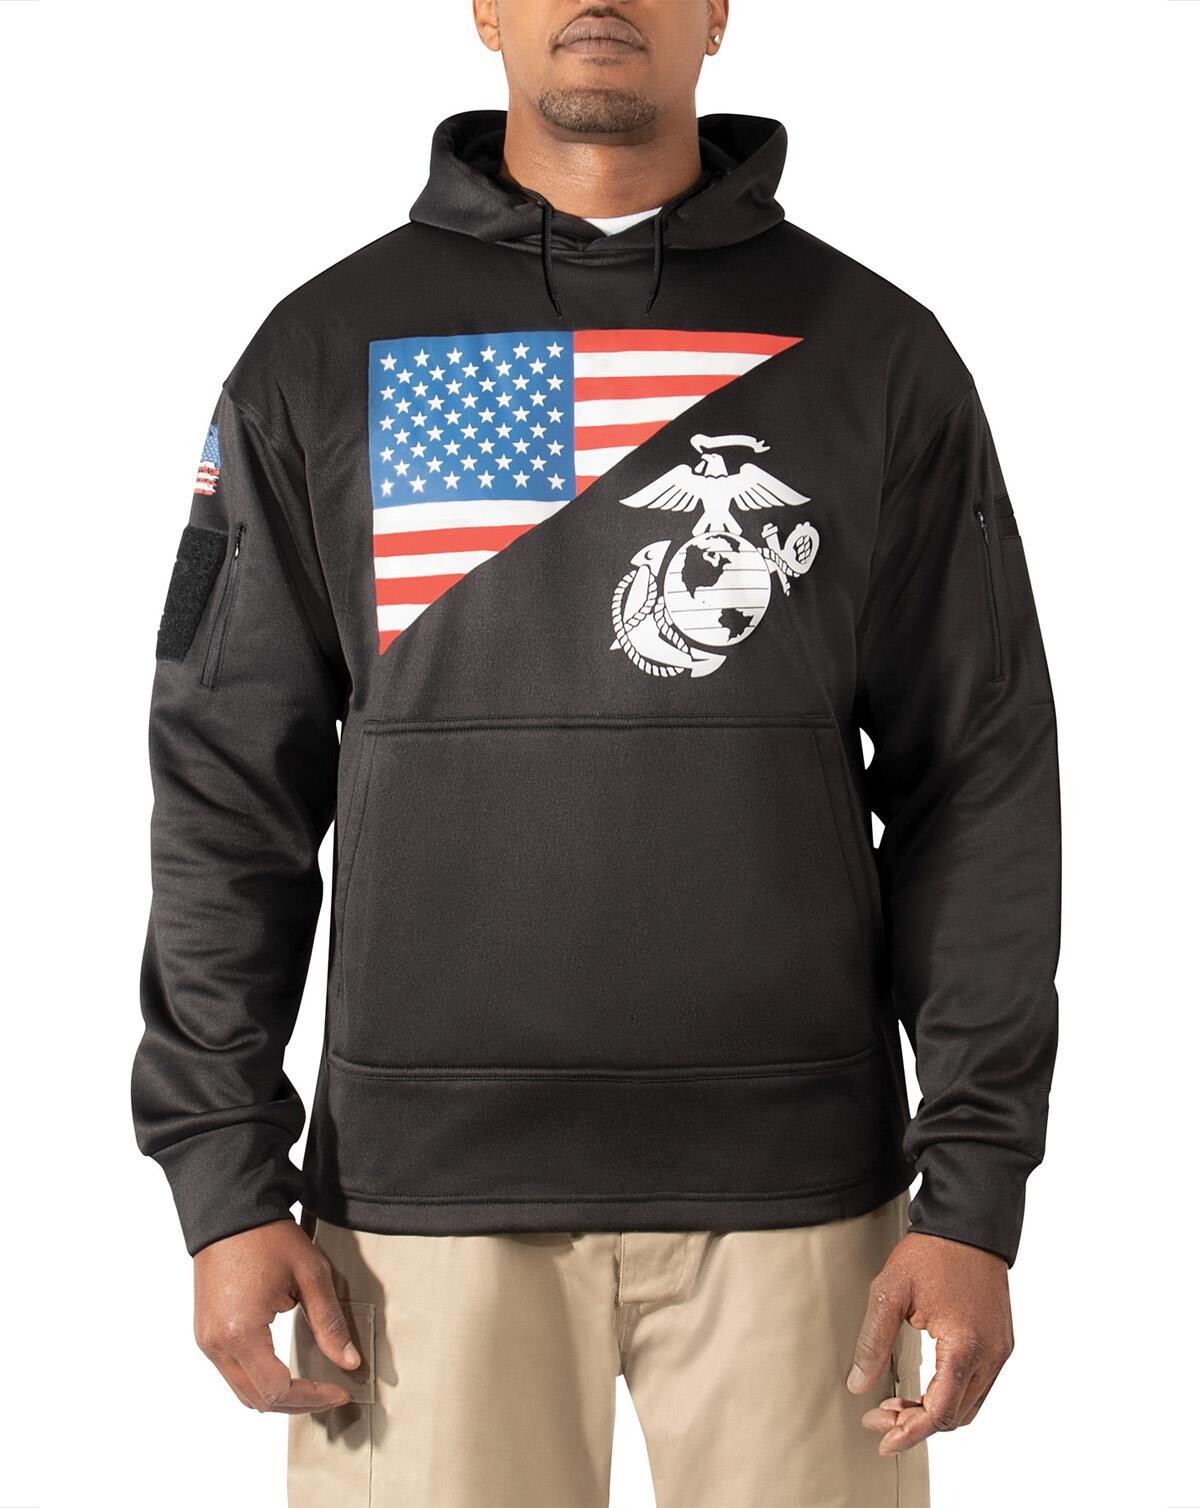 Rothco US Flag Concealed Carry Hoodie (Sort, 3XL)